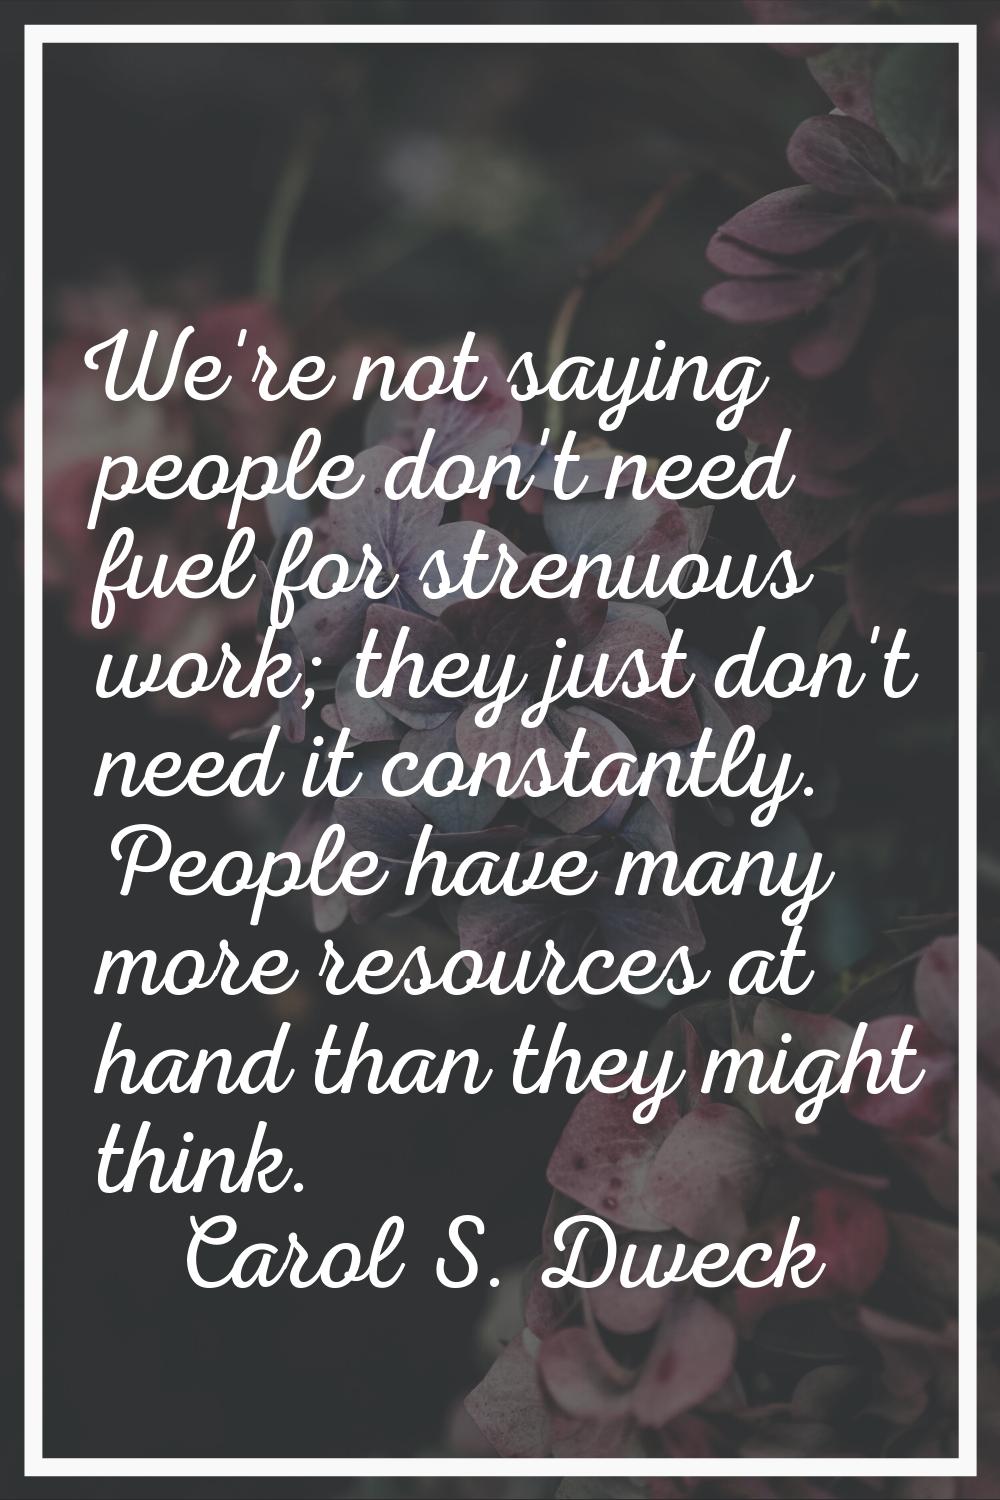 We're not saying people don't need fuel for strenuous work; they just don't need it constantly. Peo